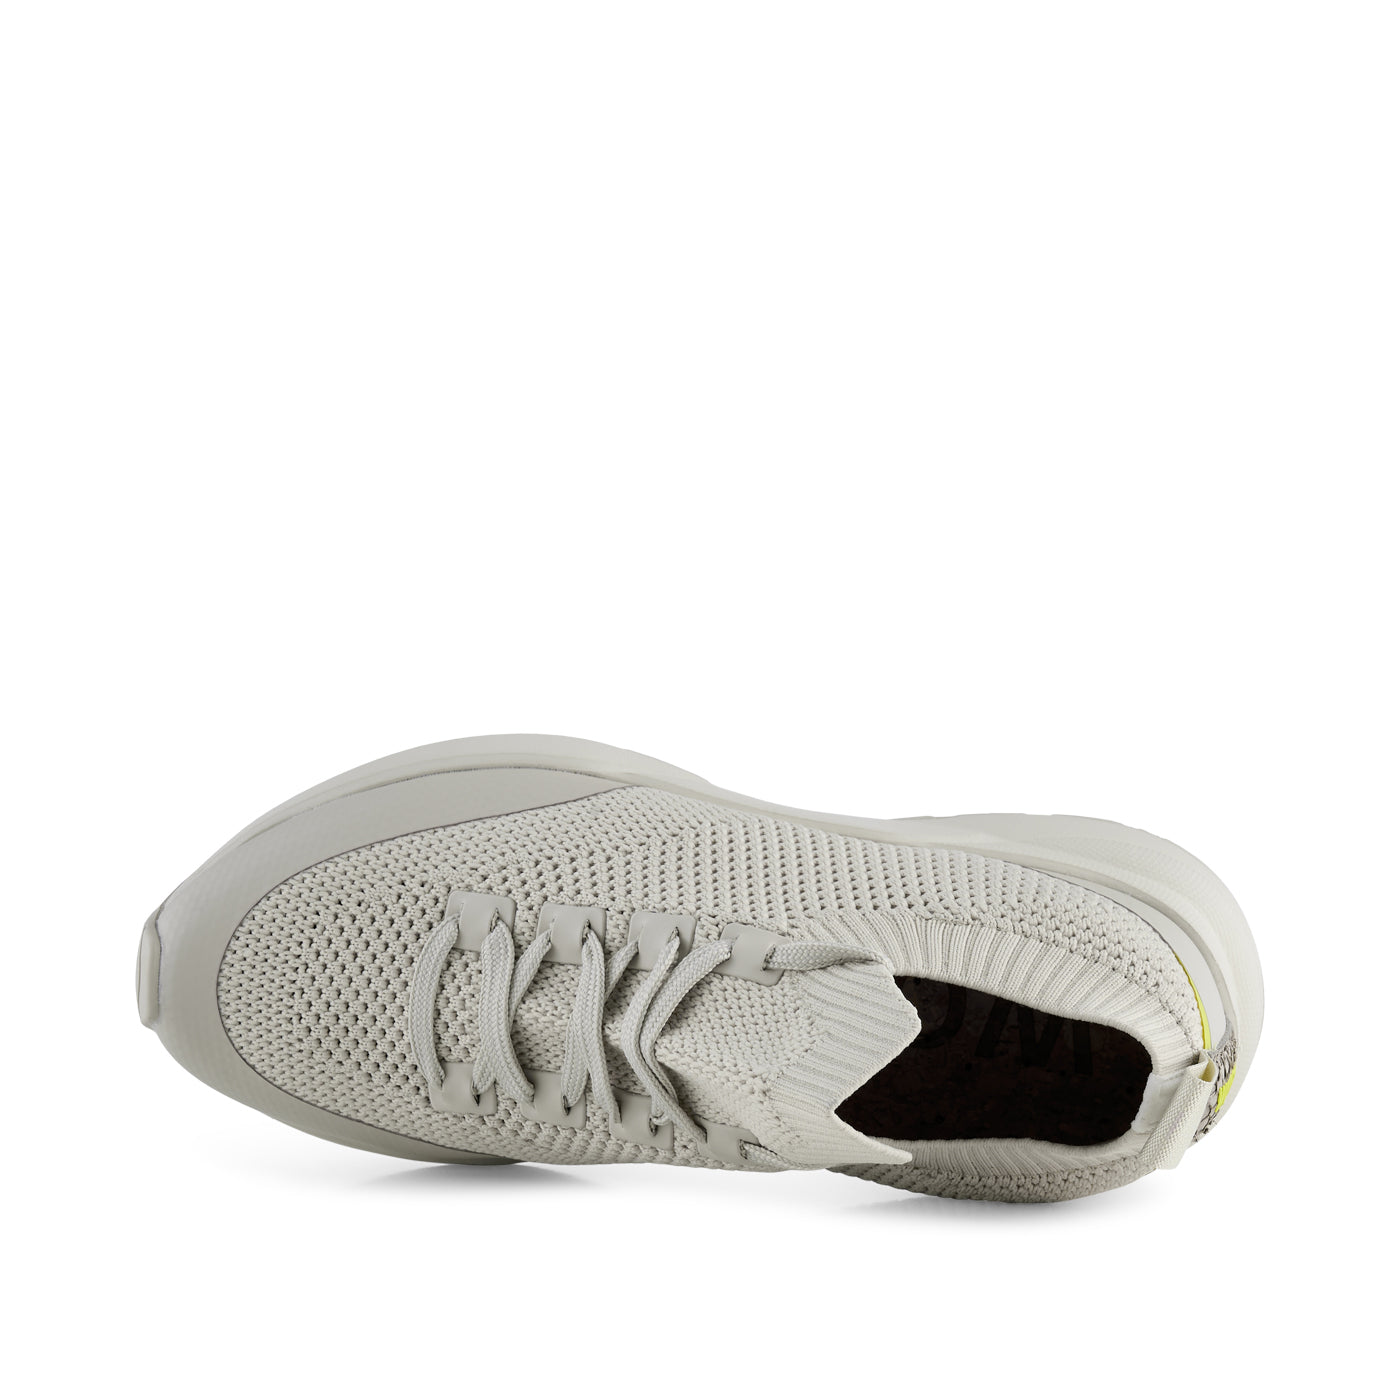 WODEN Esther Sneakers 798 Oat Meal